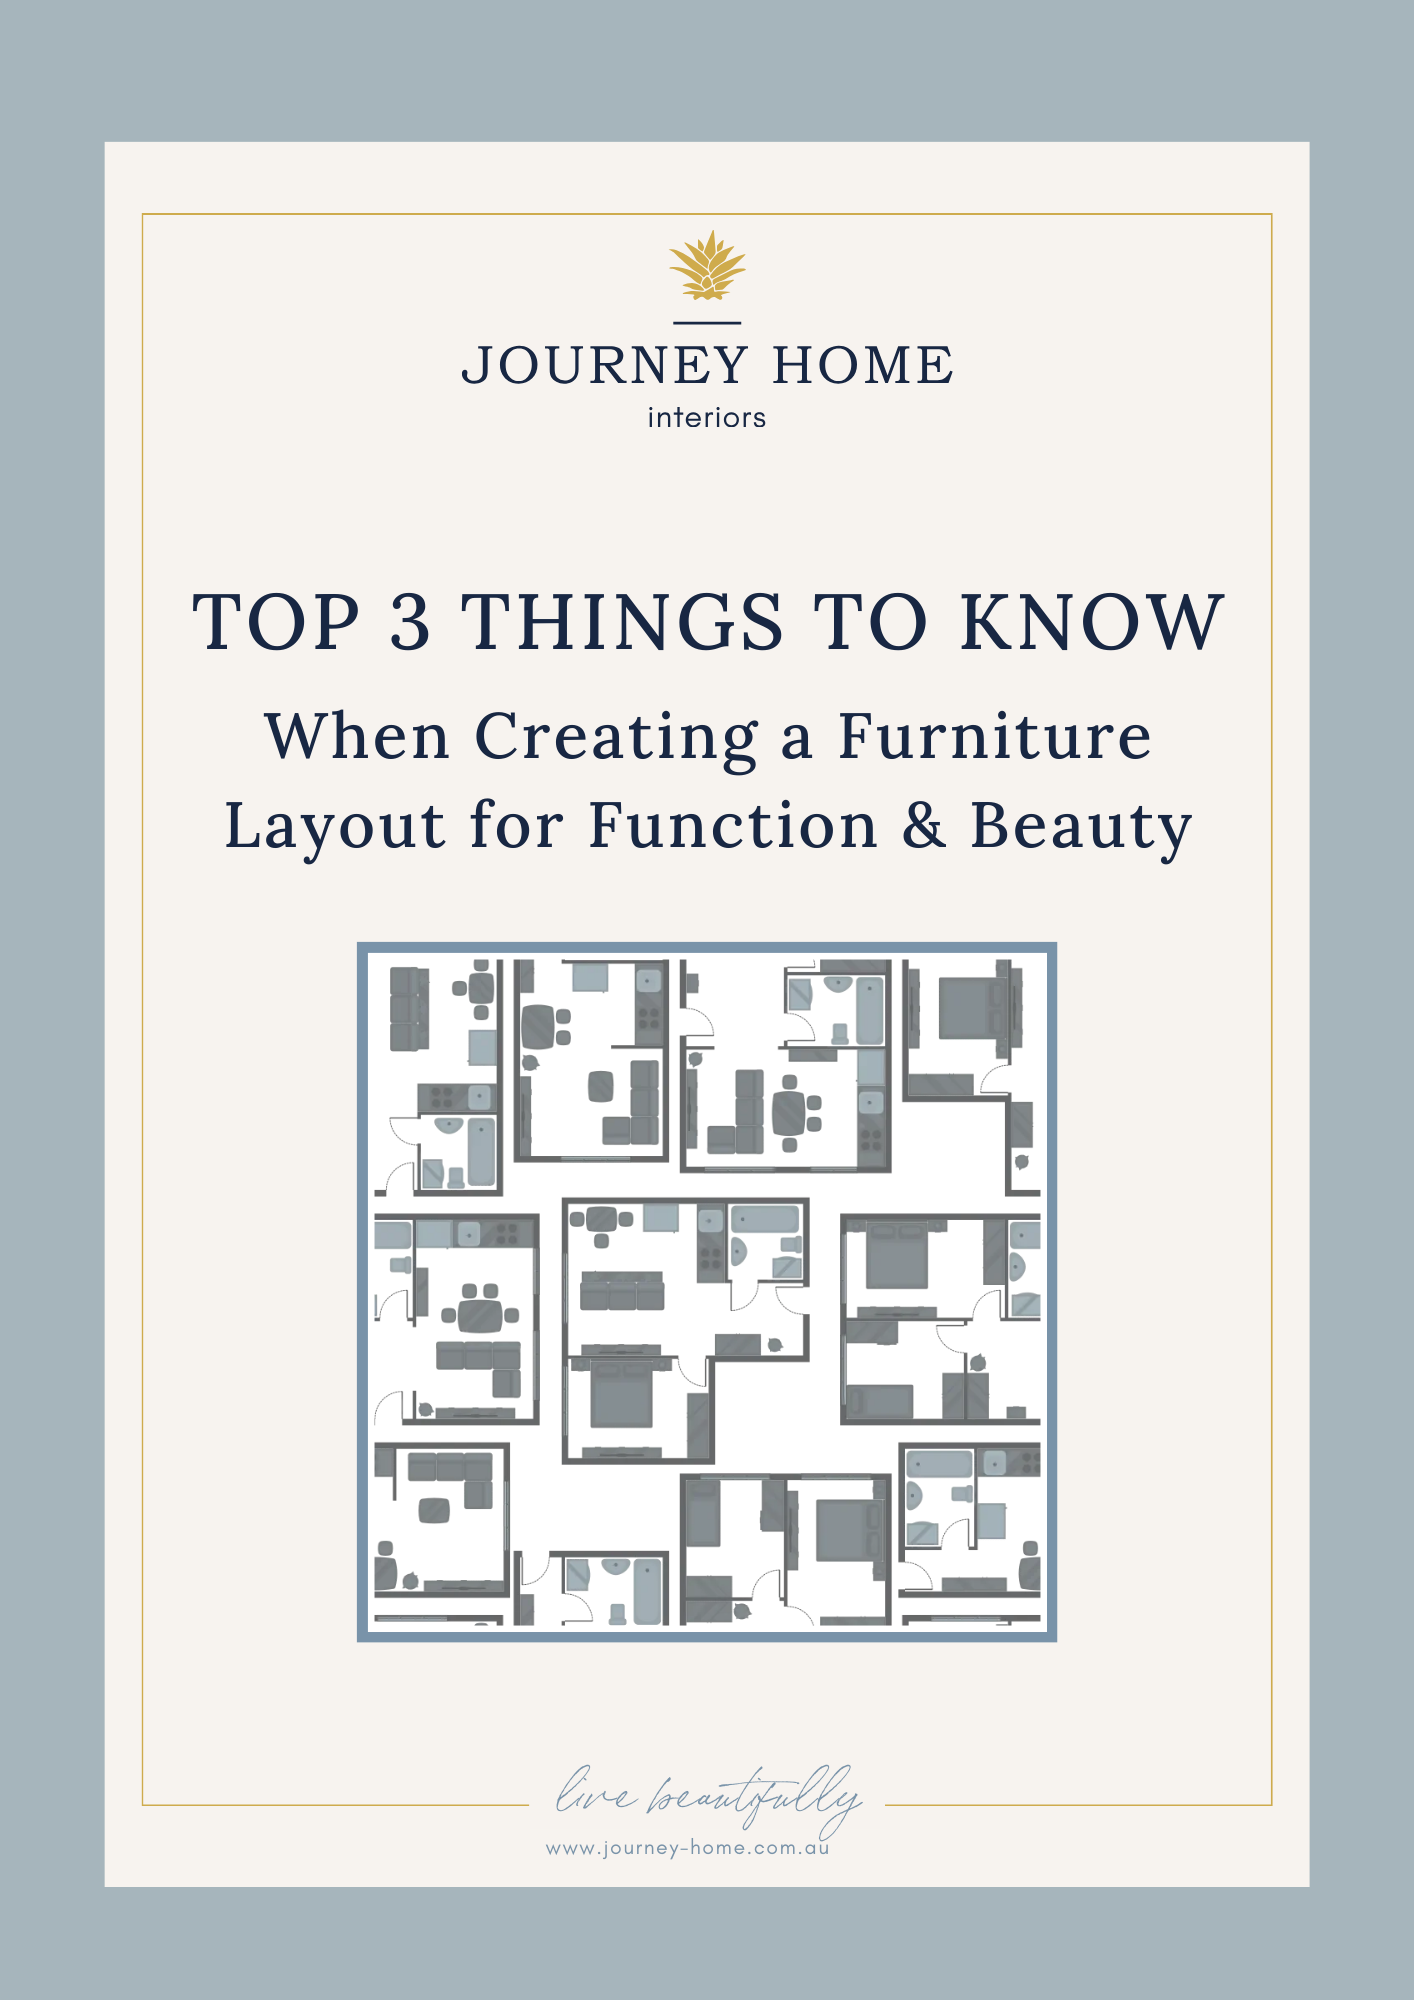 Three Things to Know When Creating a Furniture Layout